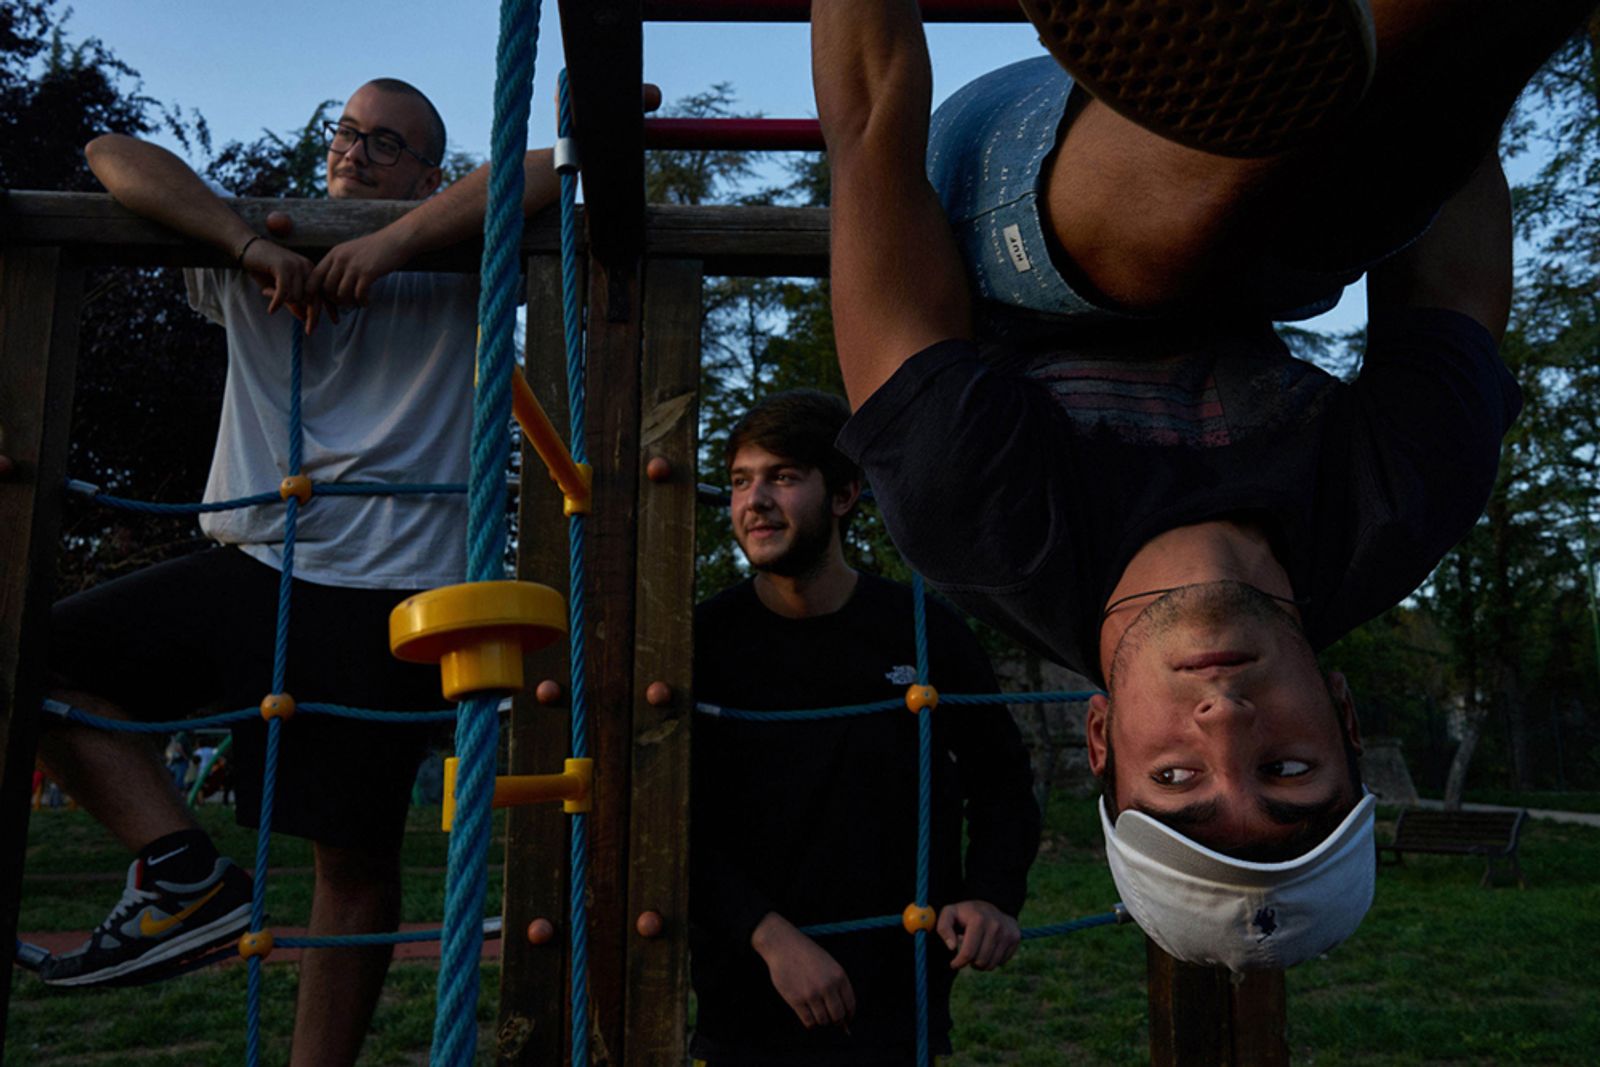 © Danilo Garcia Di Meo - the boys, having no meeting points, also spend time at the park